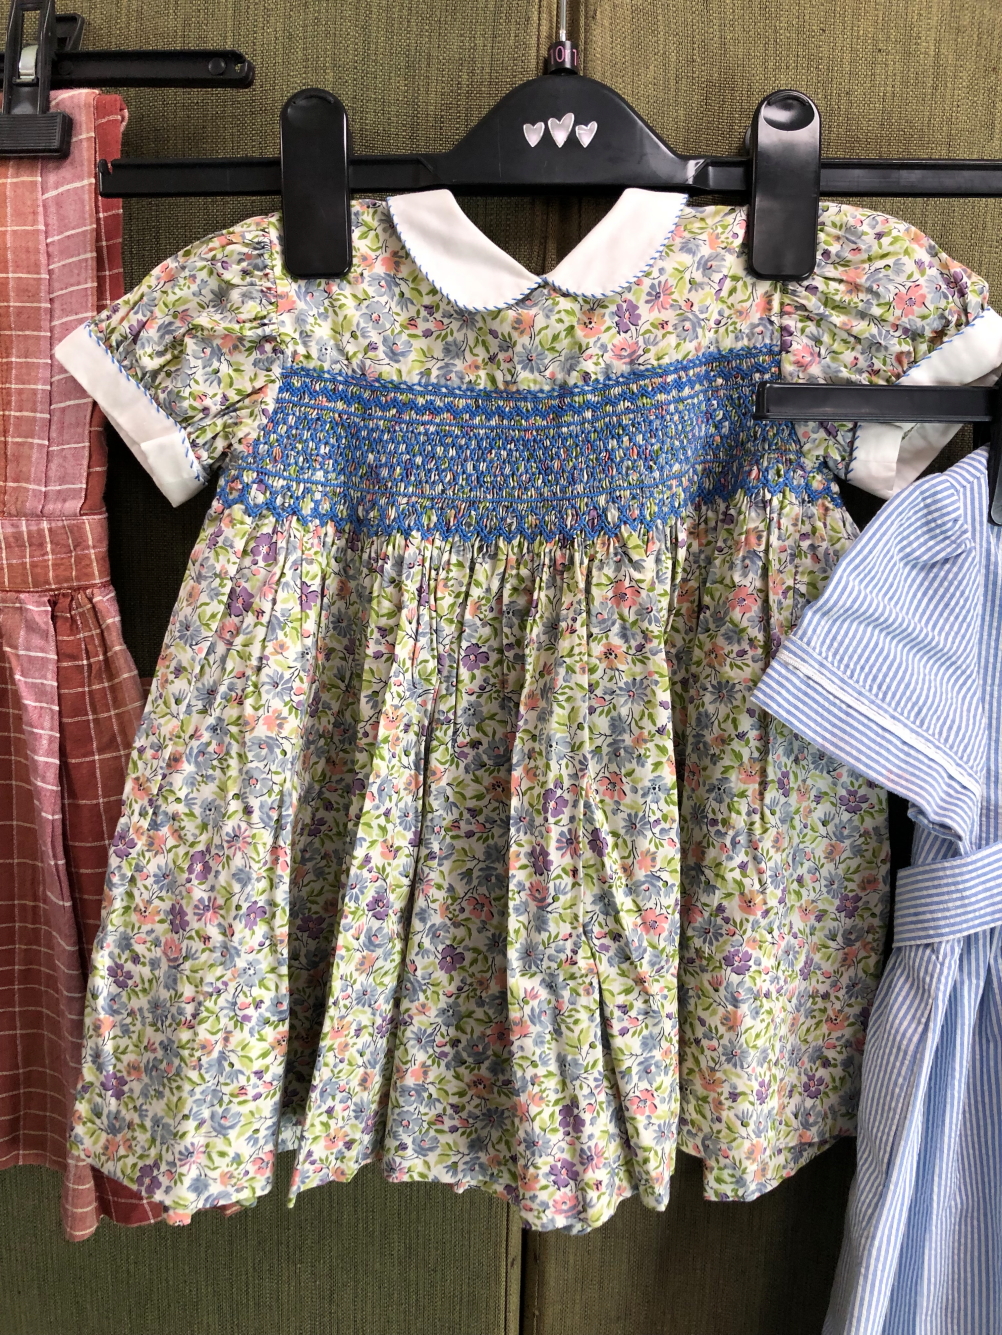 A LIBERTY OF LONDON SMOCKED CHILD'S DRESS, TOGETHER WITH TWO DANIEL HECHTER DRESSES (3) - Image 2 of 8